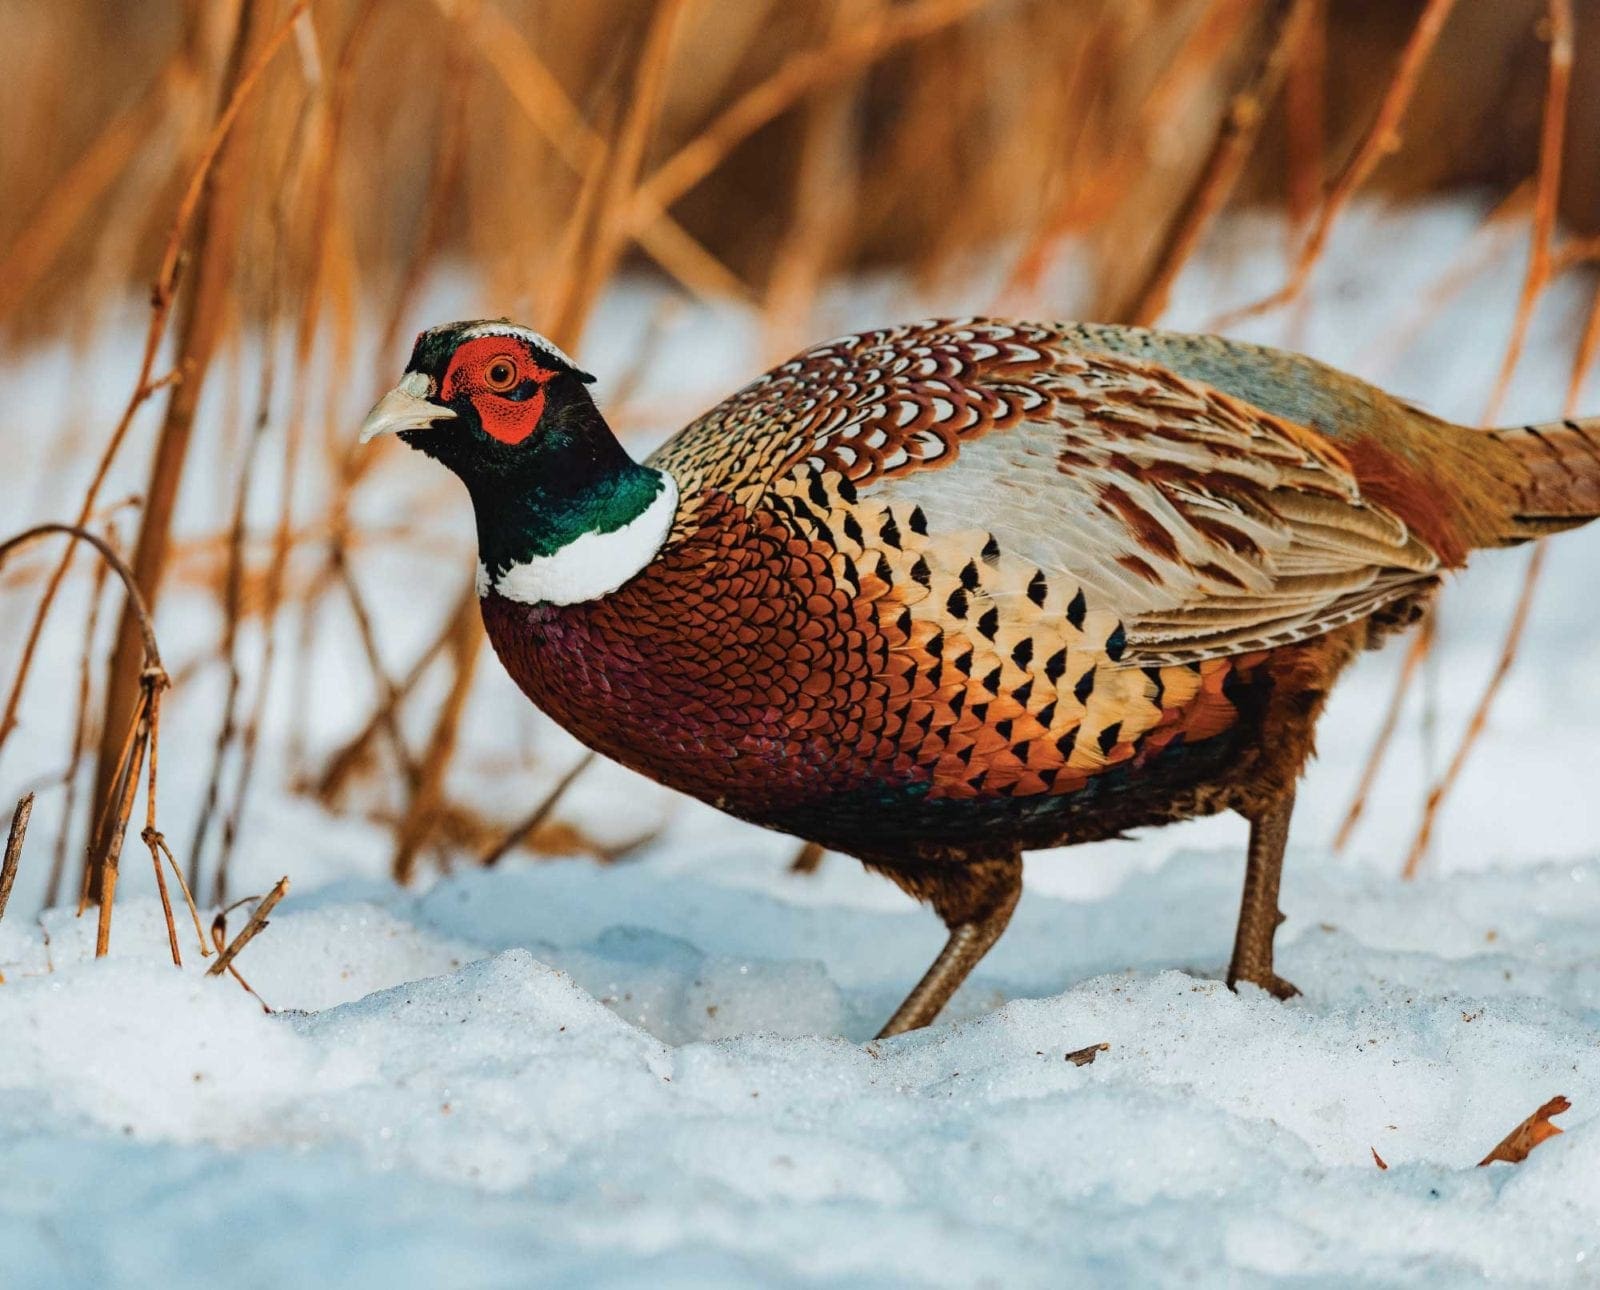 A pheasant walking in the snow.